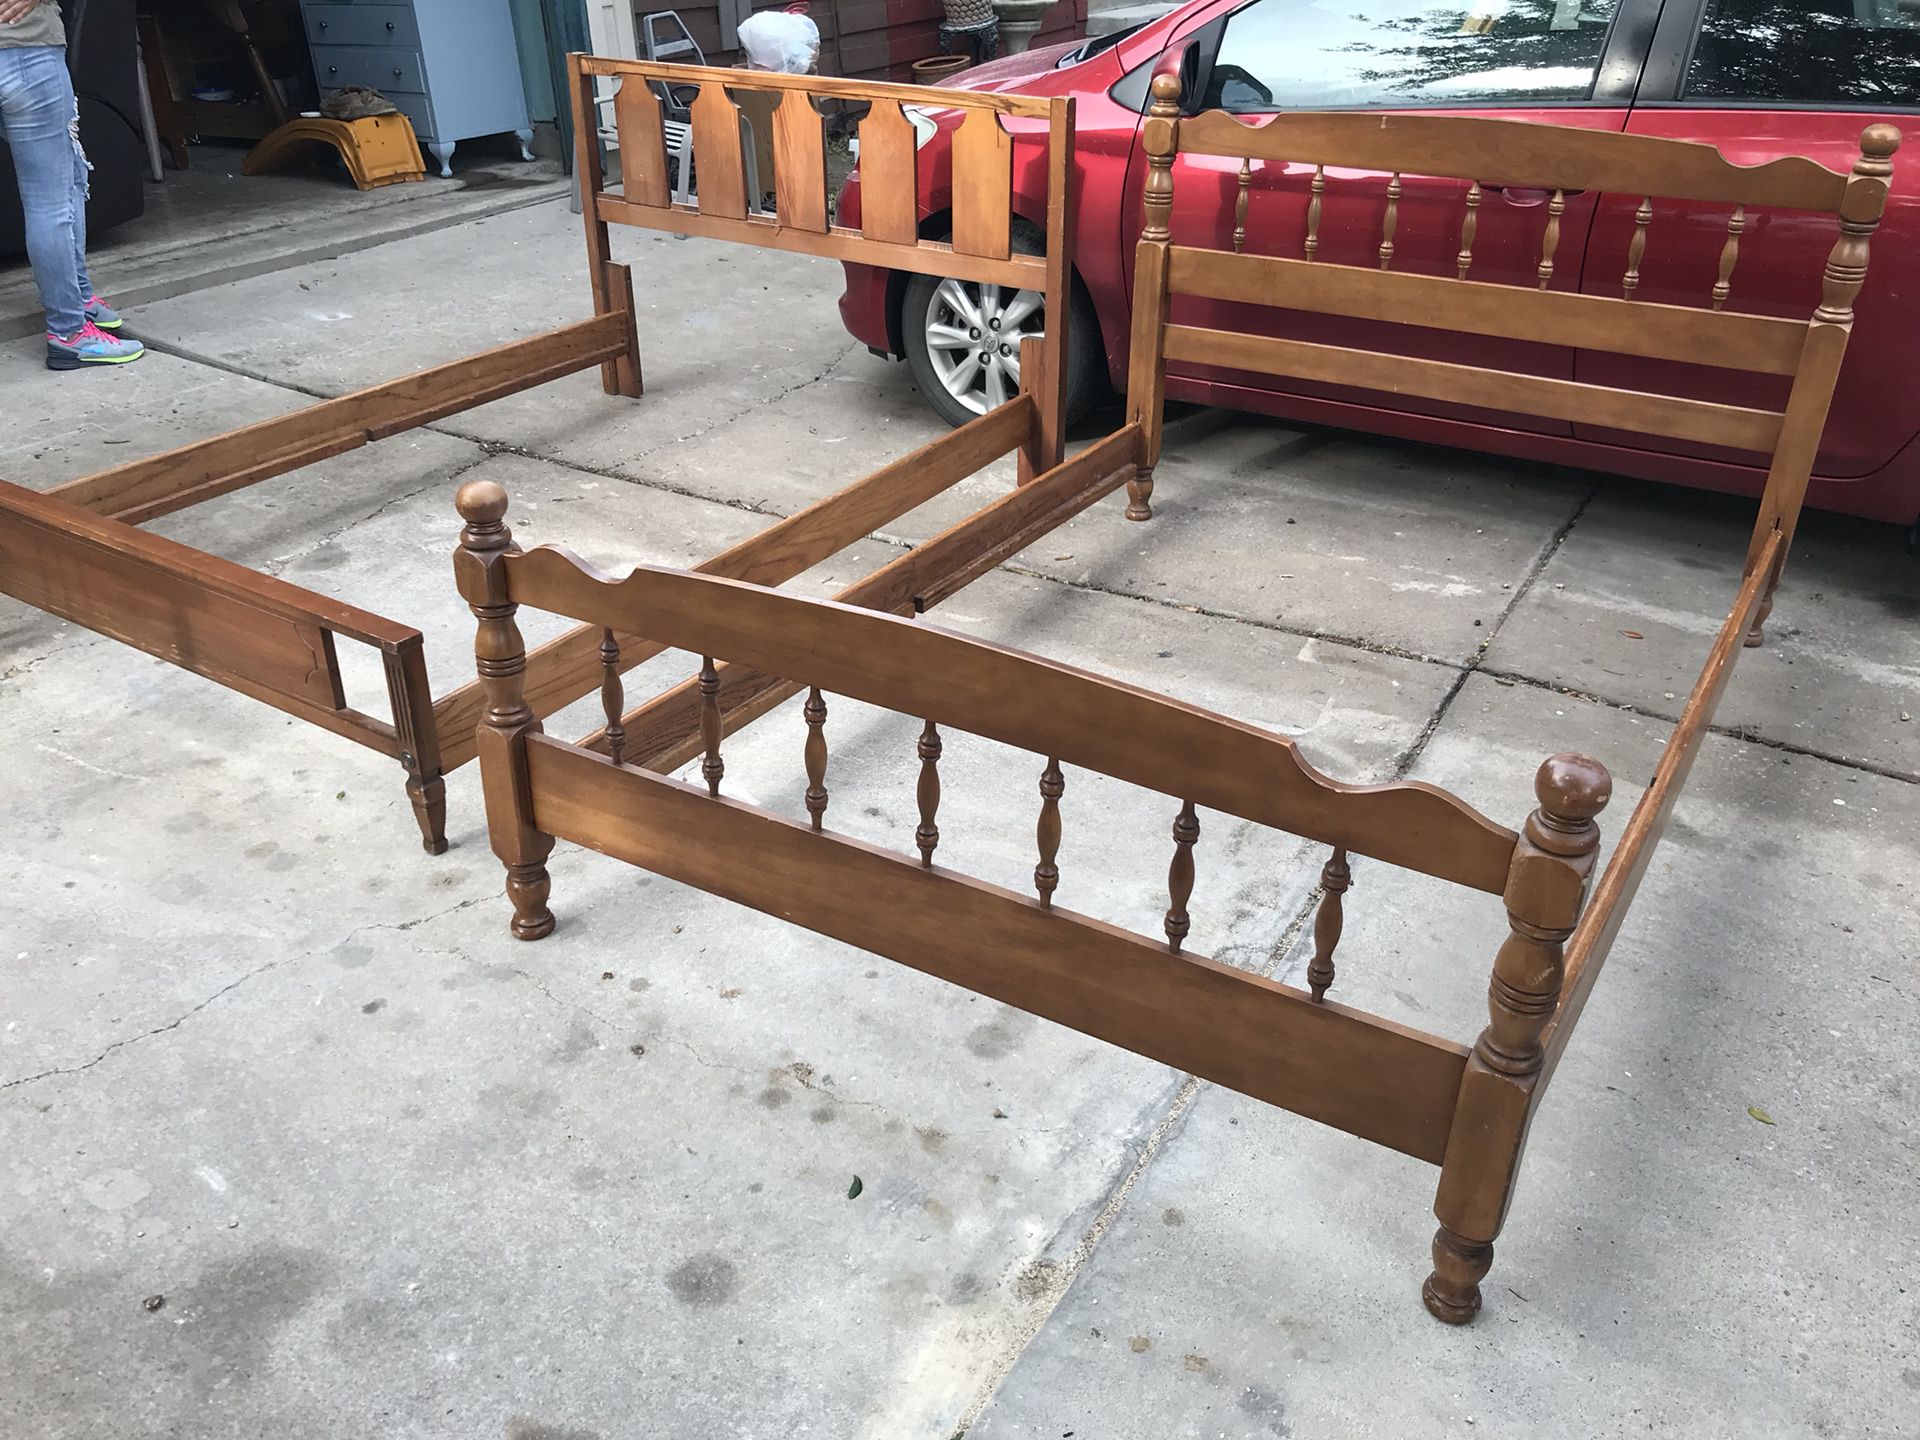 Two full size bed frames